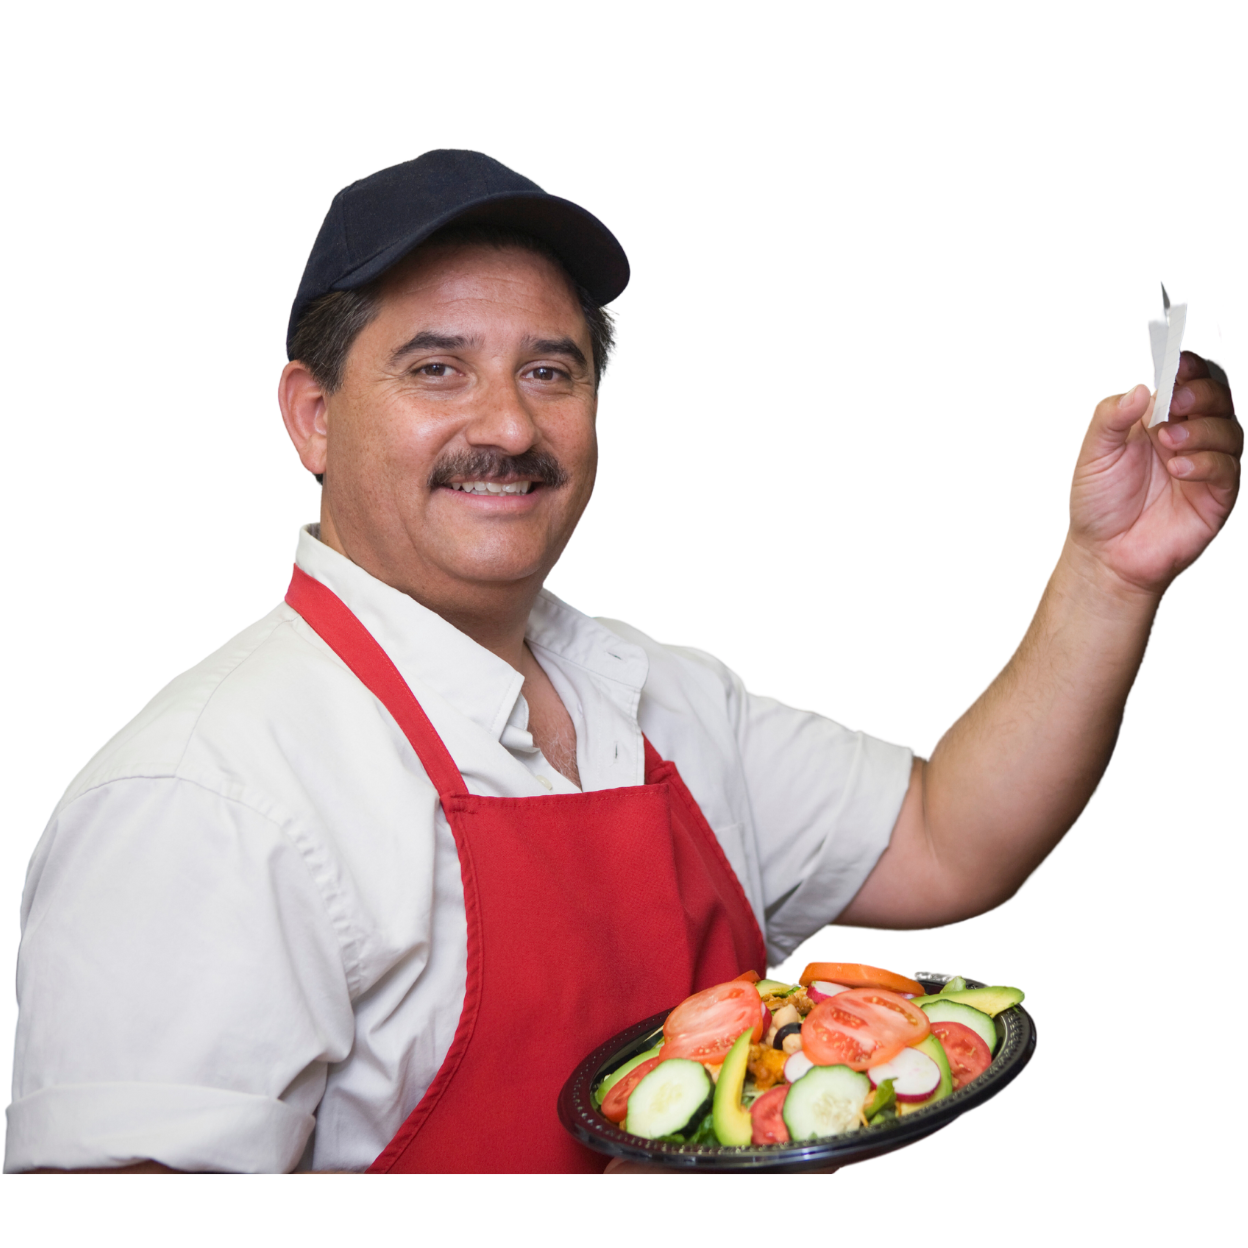 Portrait-of-Hispanic-Latin-man-with-served-food-standing-in-restaurant-kitchen